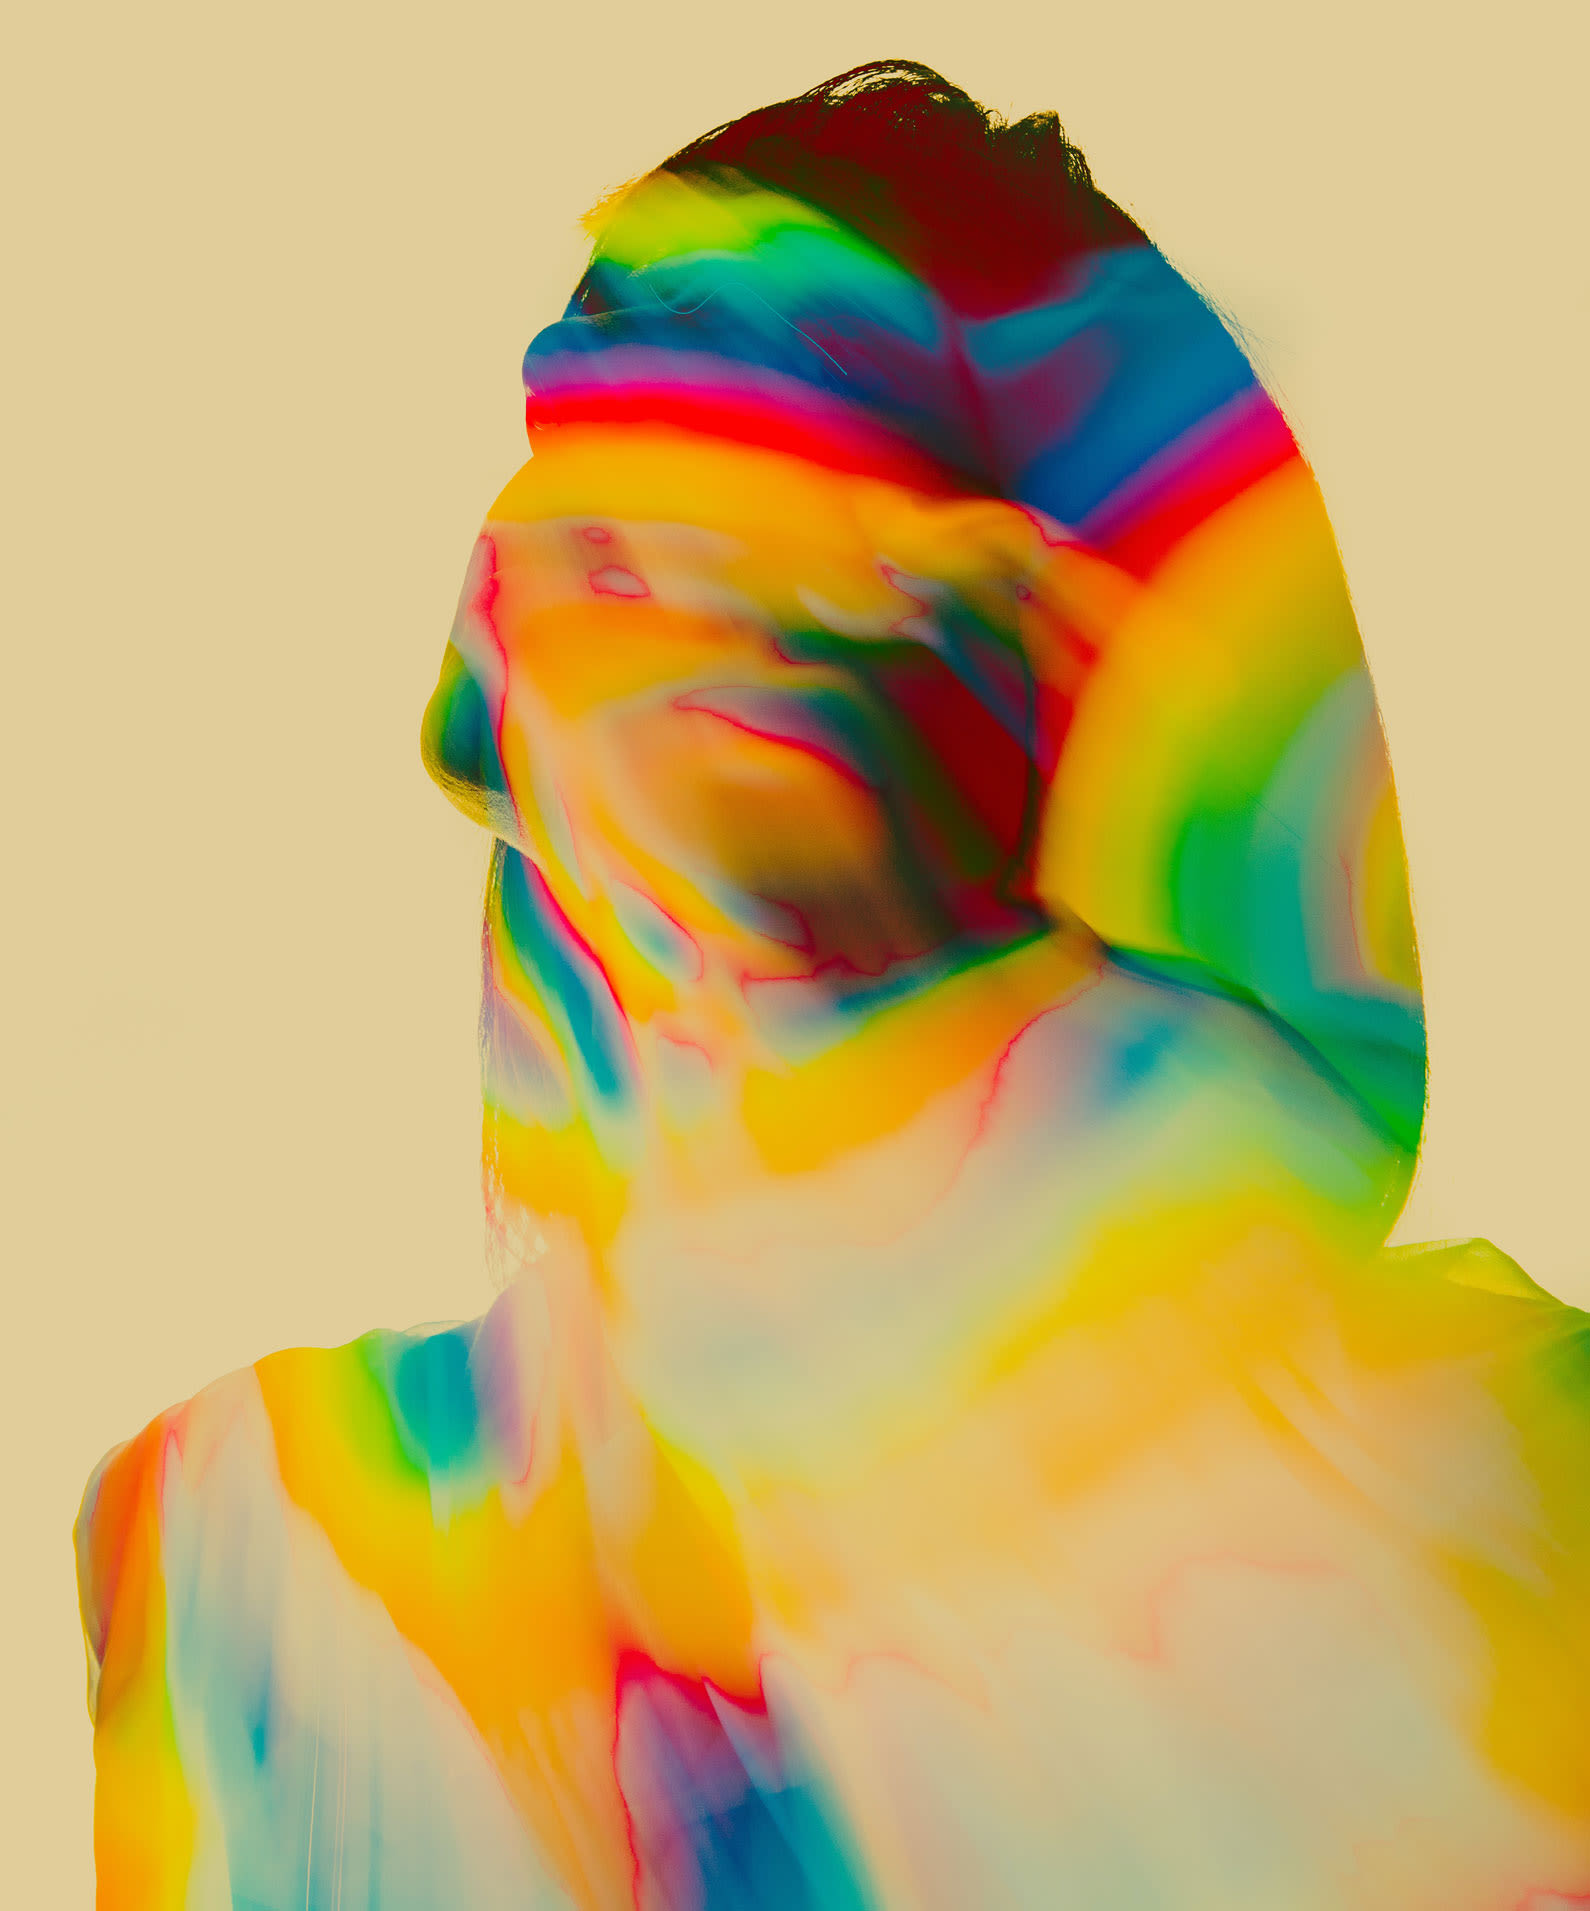 Woman's head and torso awash with rainbow colors alluding to mental state